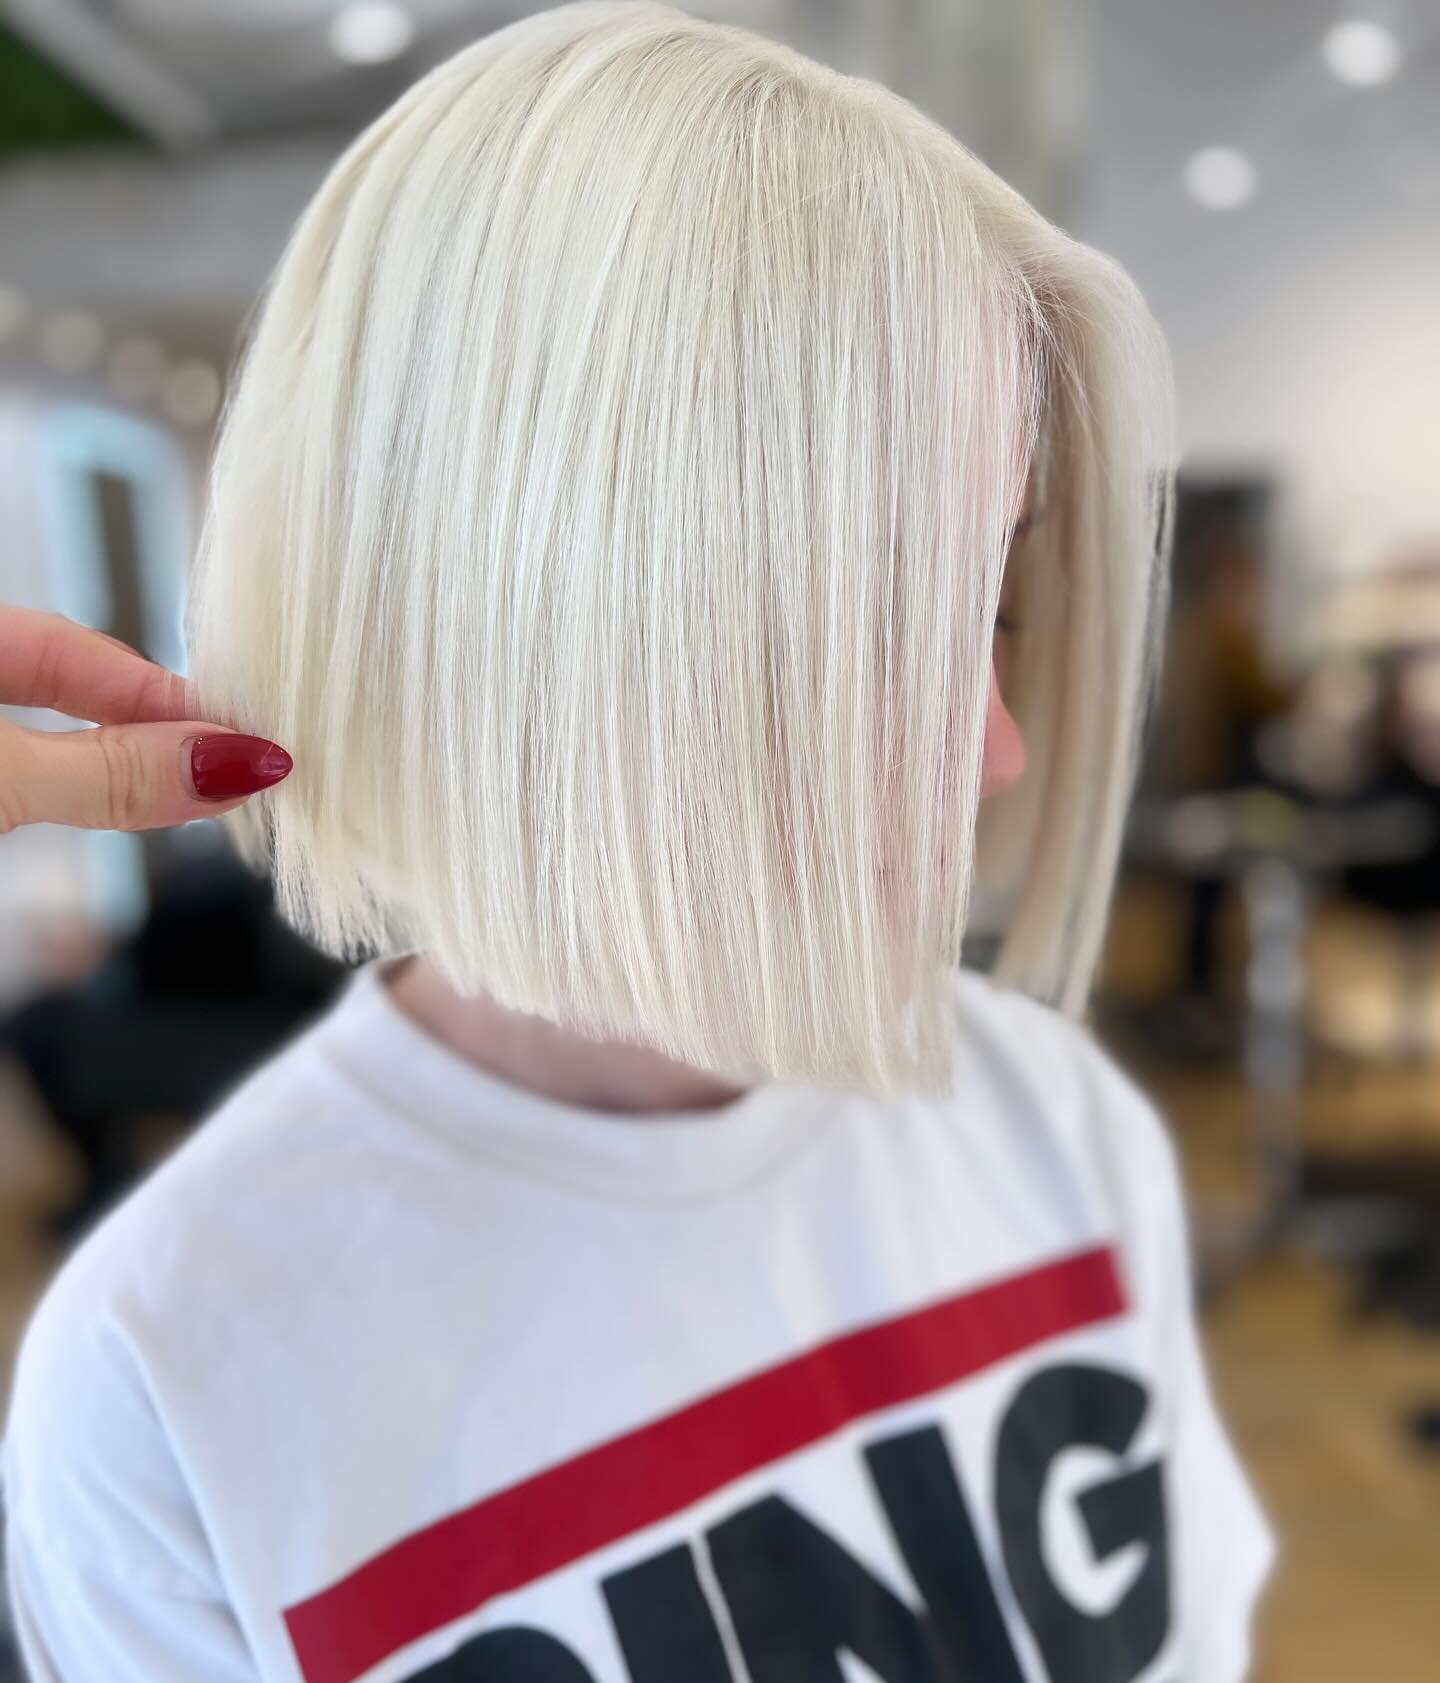 Winter&rsquo;s Embrace: Unleashing the icy allure of an enchanting blonde bob, mirroring the snowy elegance of a Chicago day. ❄️✨ #IcyBlondeChic #SnowQueenStyle